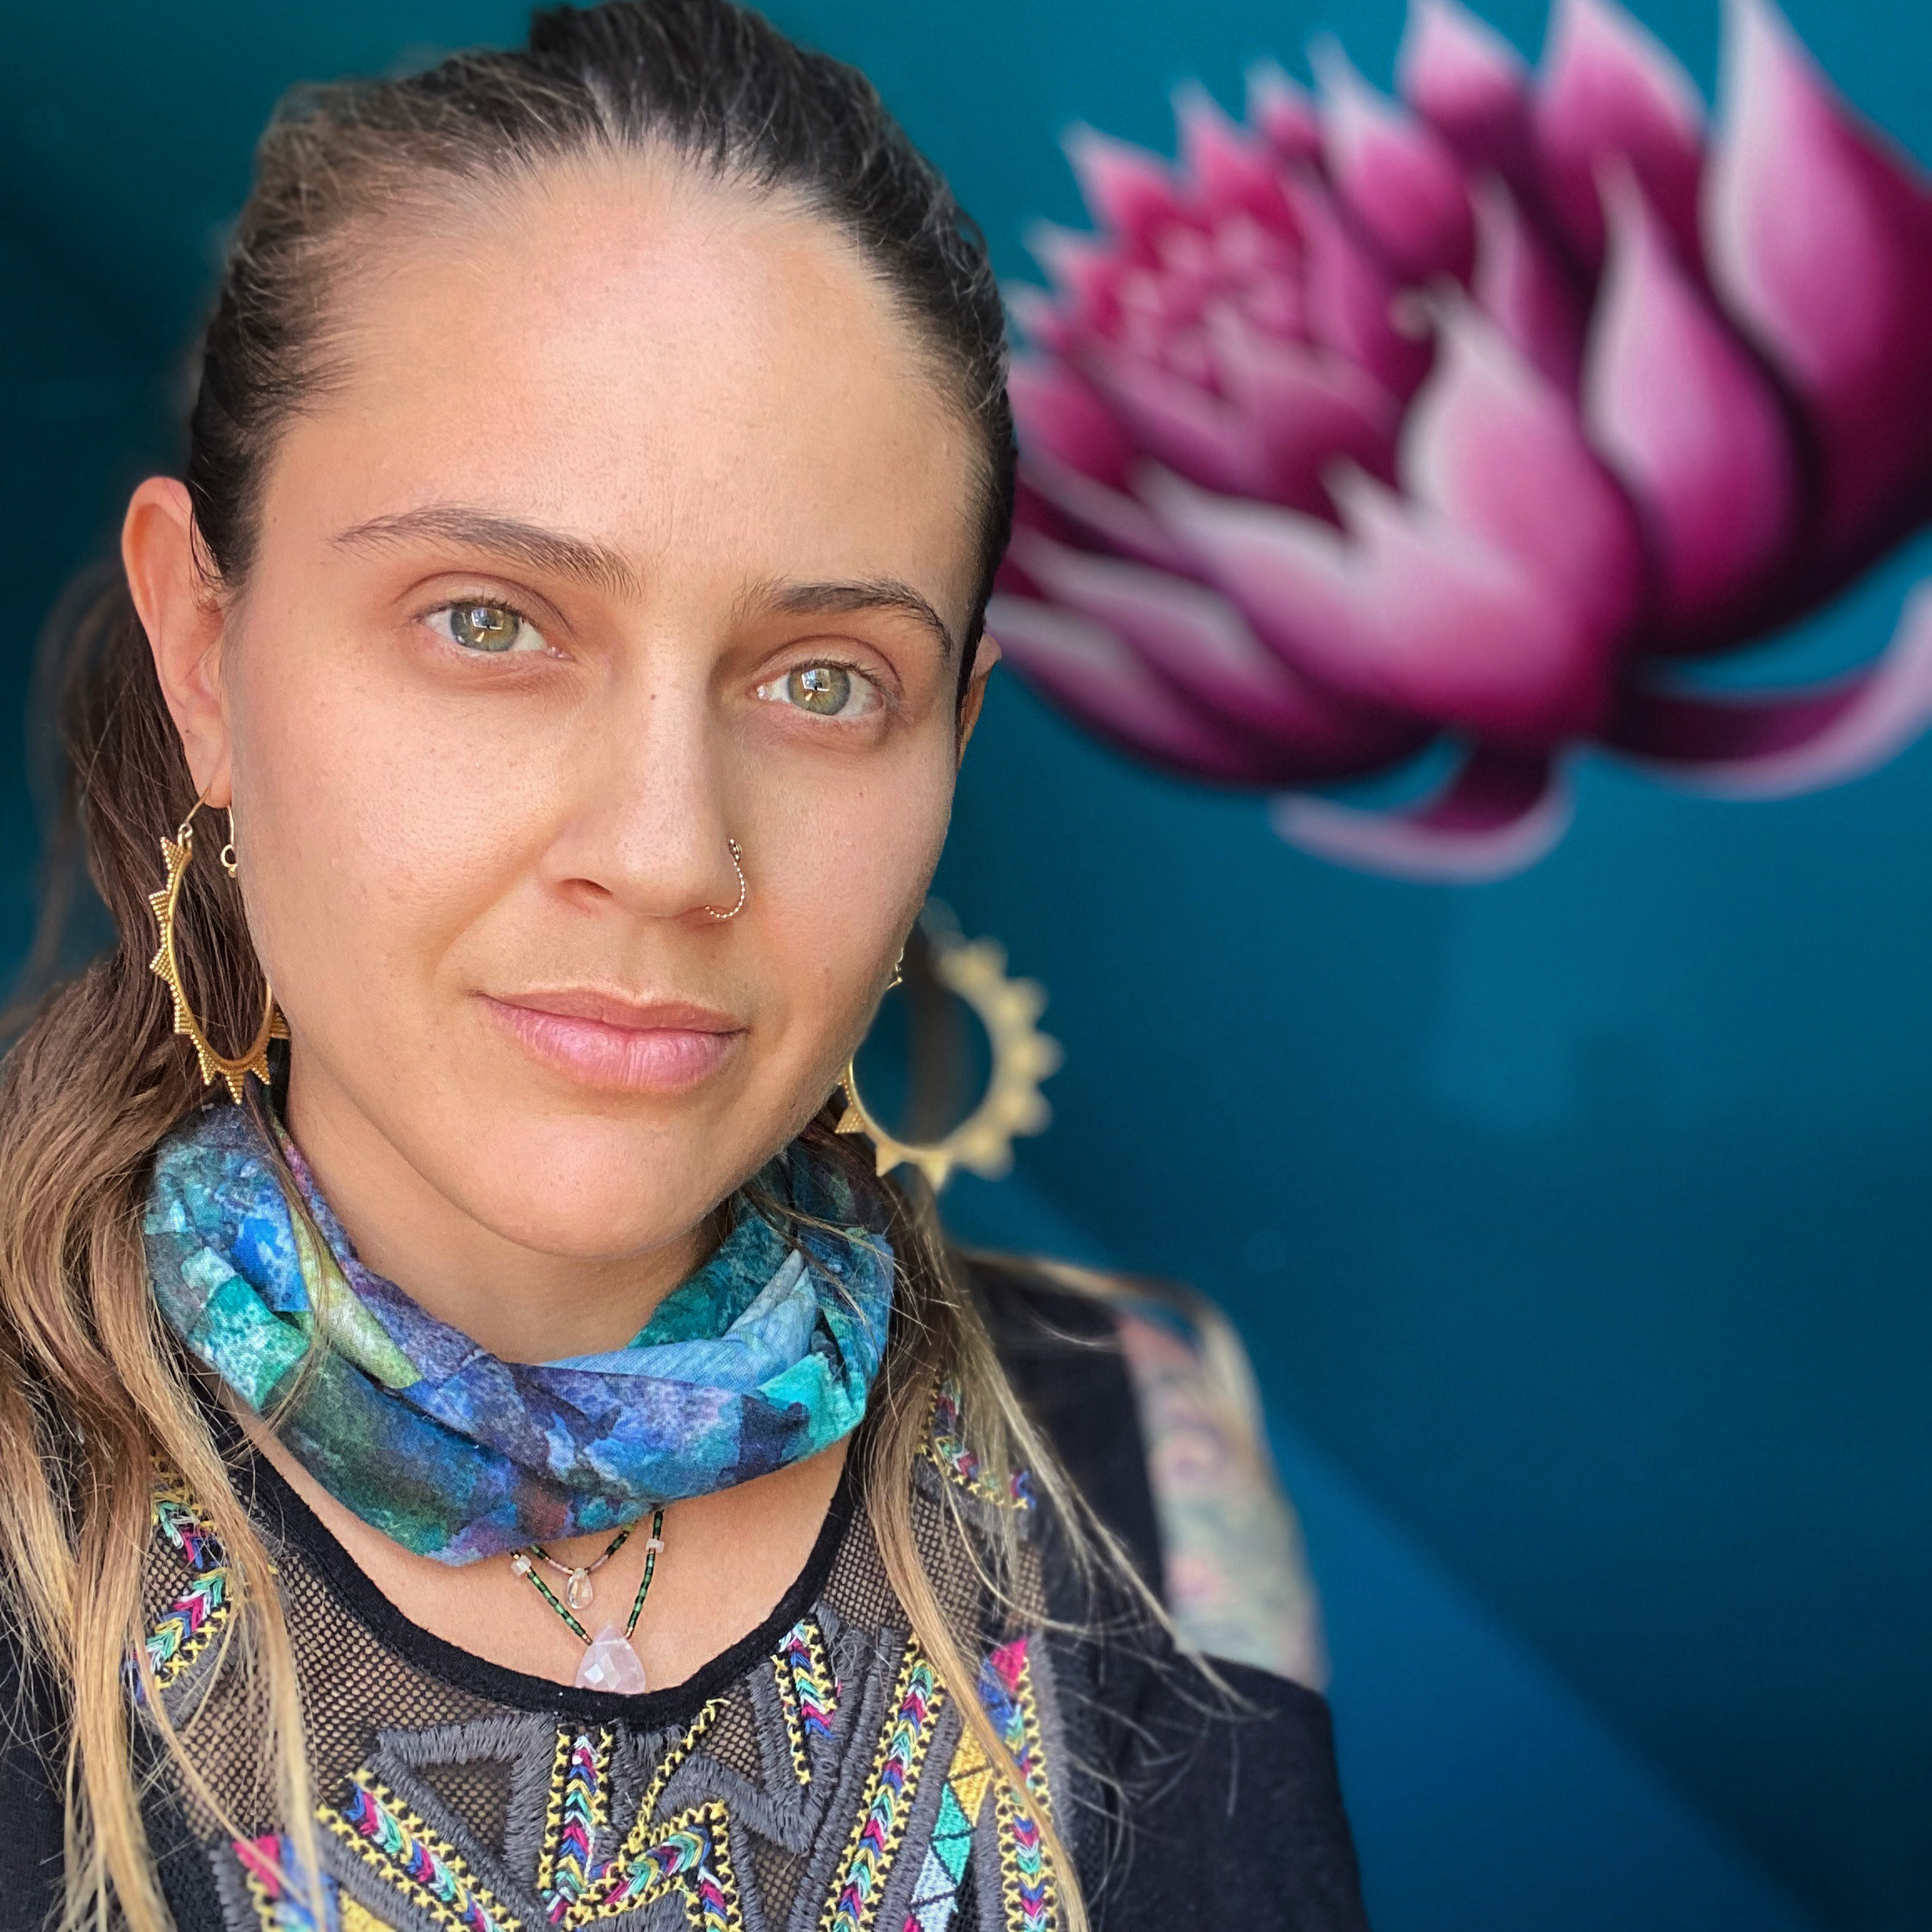 This Healing Artist is Empowering Others Into Self-Healing through her Yogic Technology